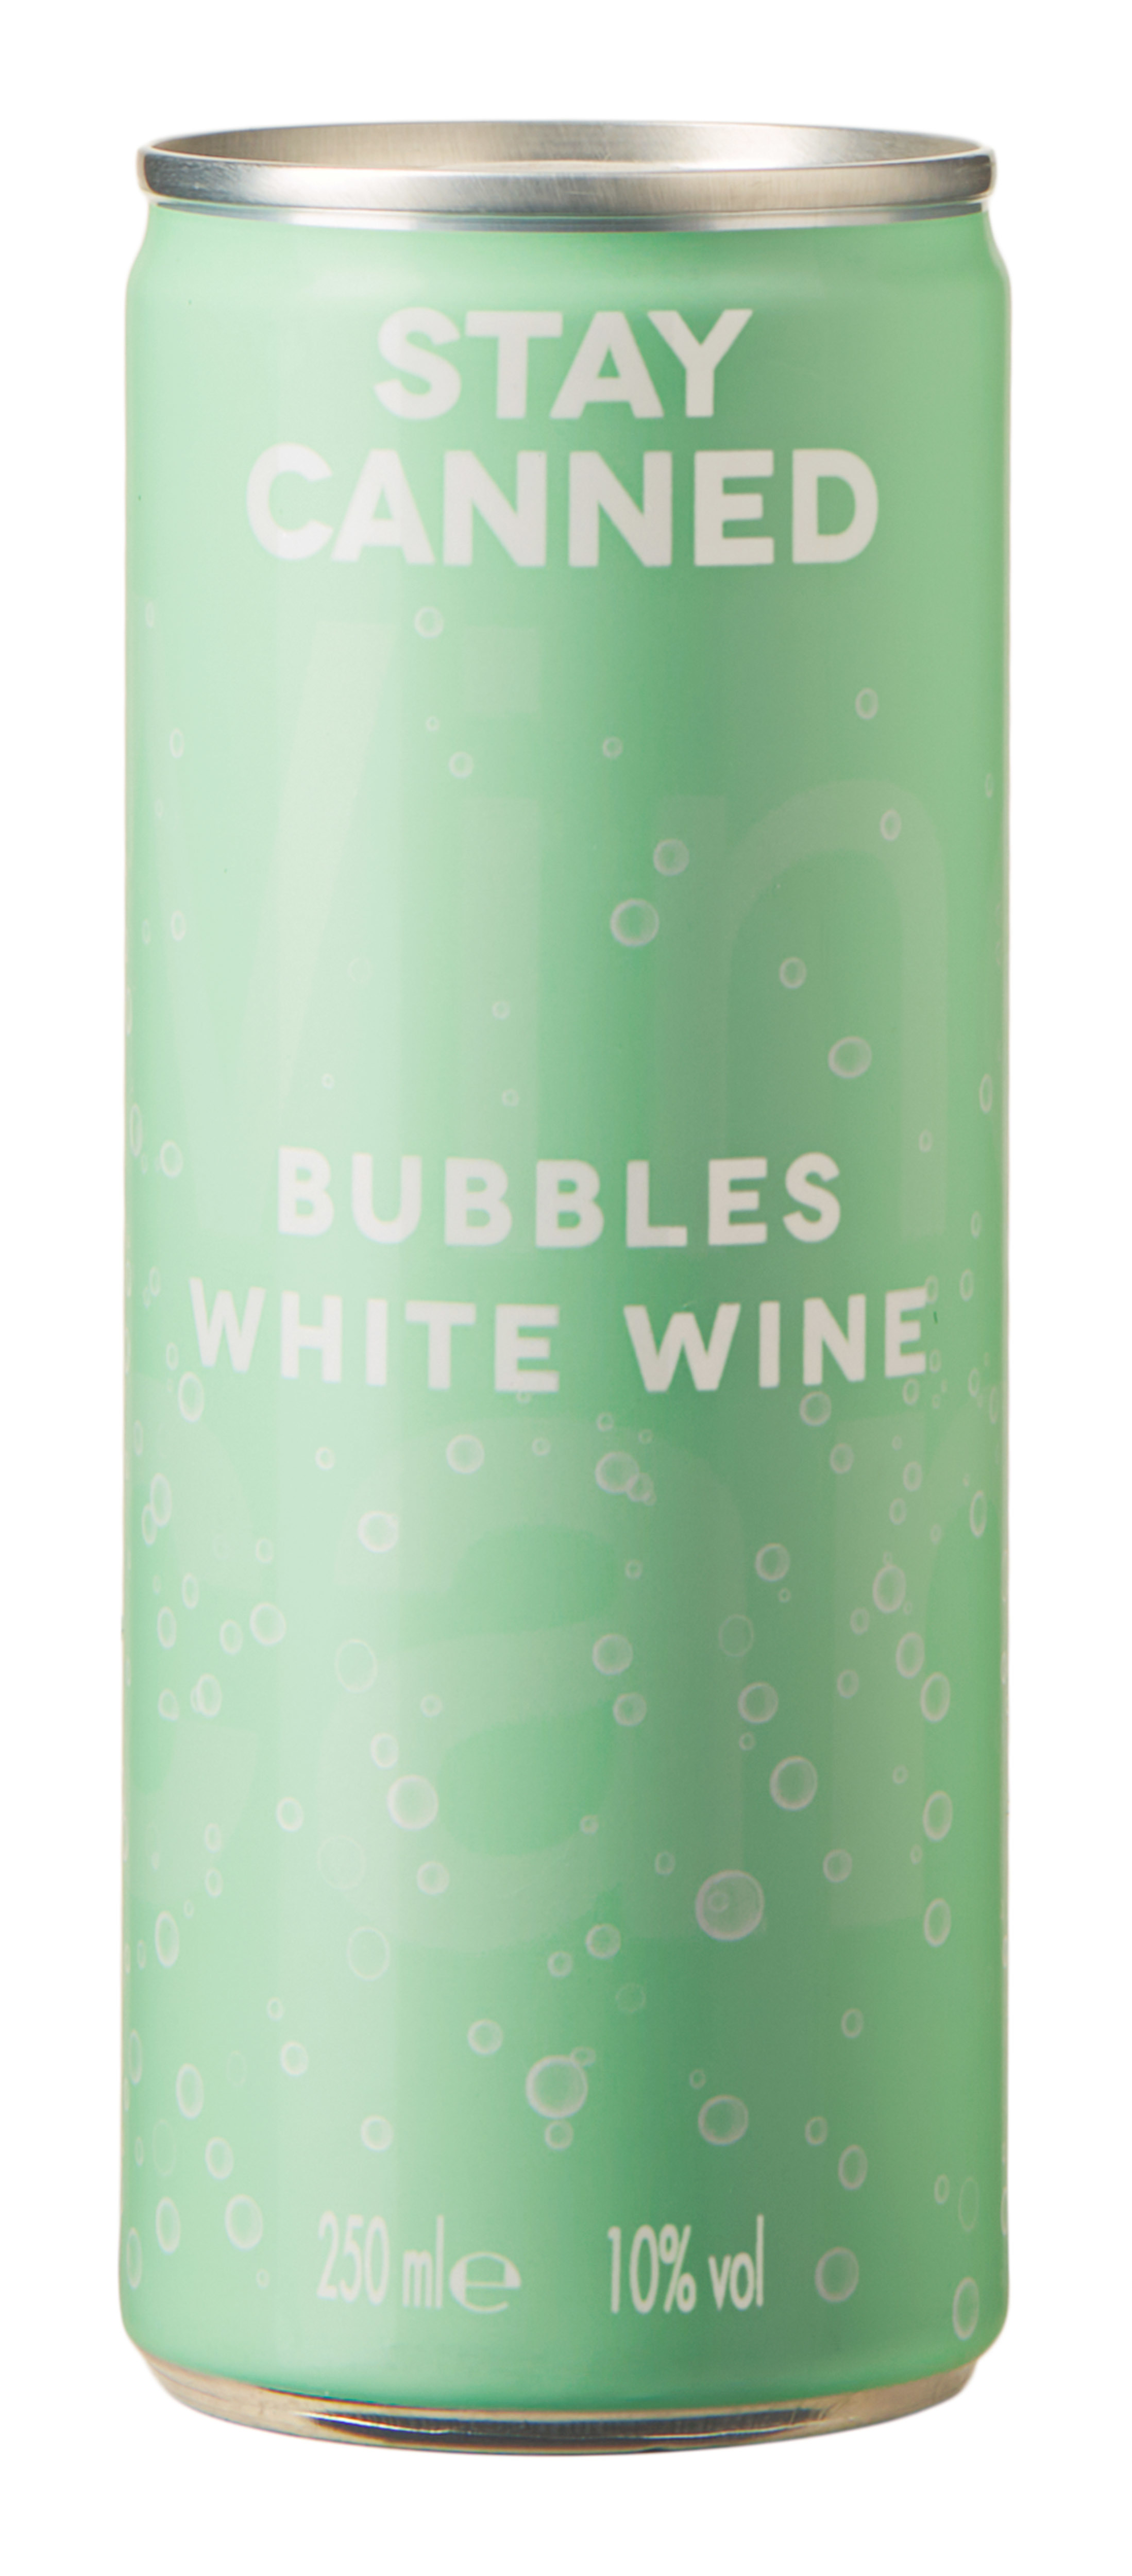 Stay Canned Sparkling white wine